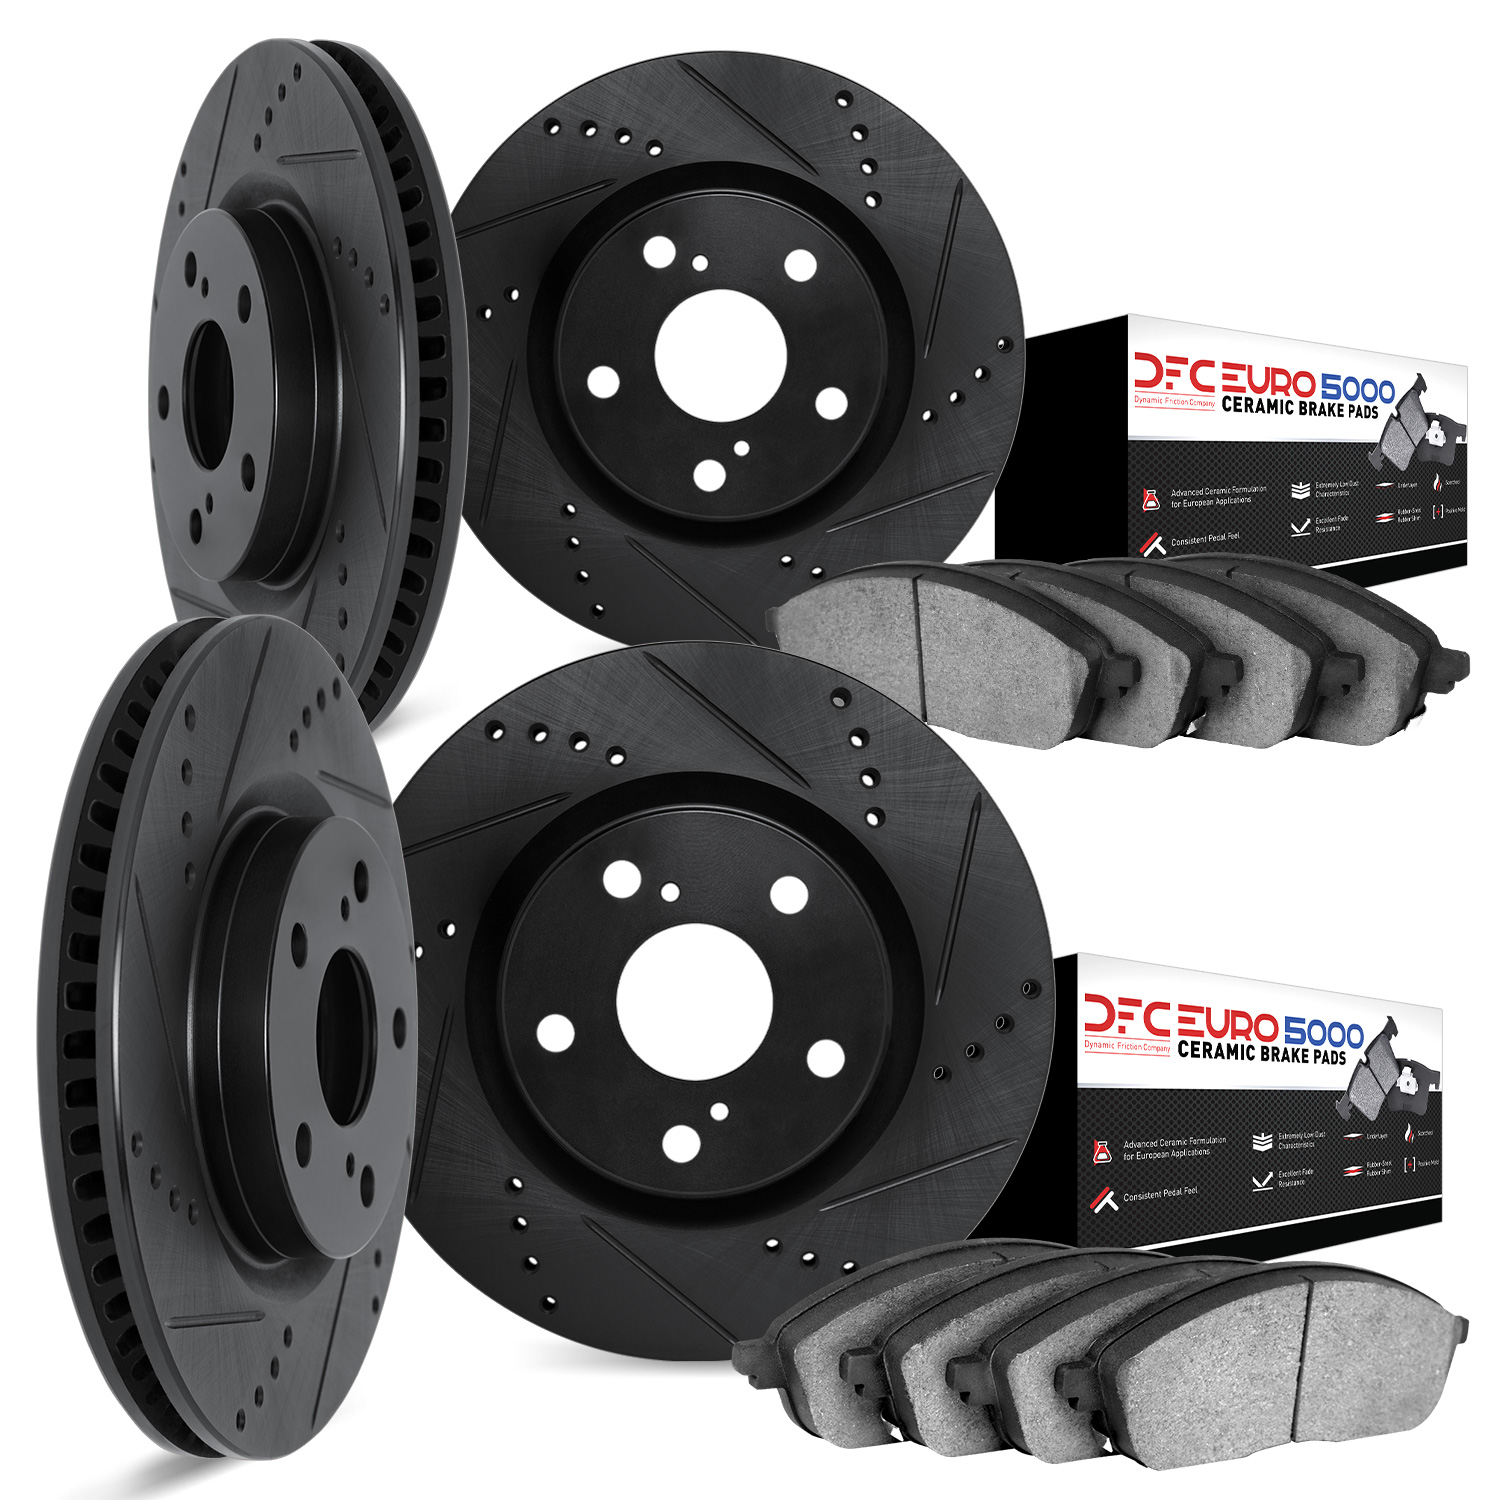 8604-31031 Drilled/Slotted Brake Rotors w/5000 Euro Ceramic Brake Pads Kit [Black], 2013-2018 BMW, Position: Front and Rear